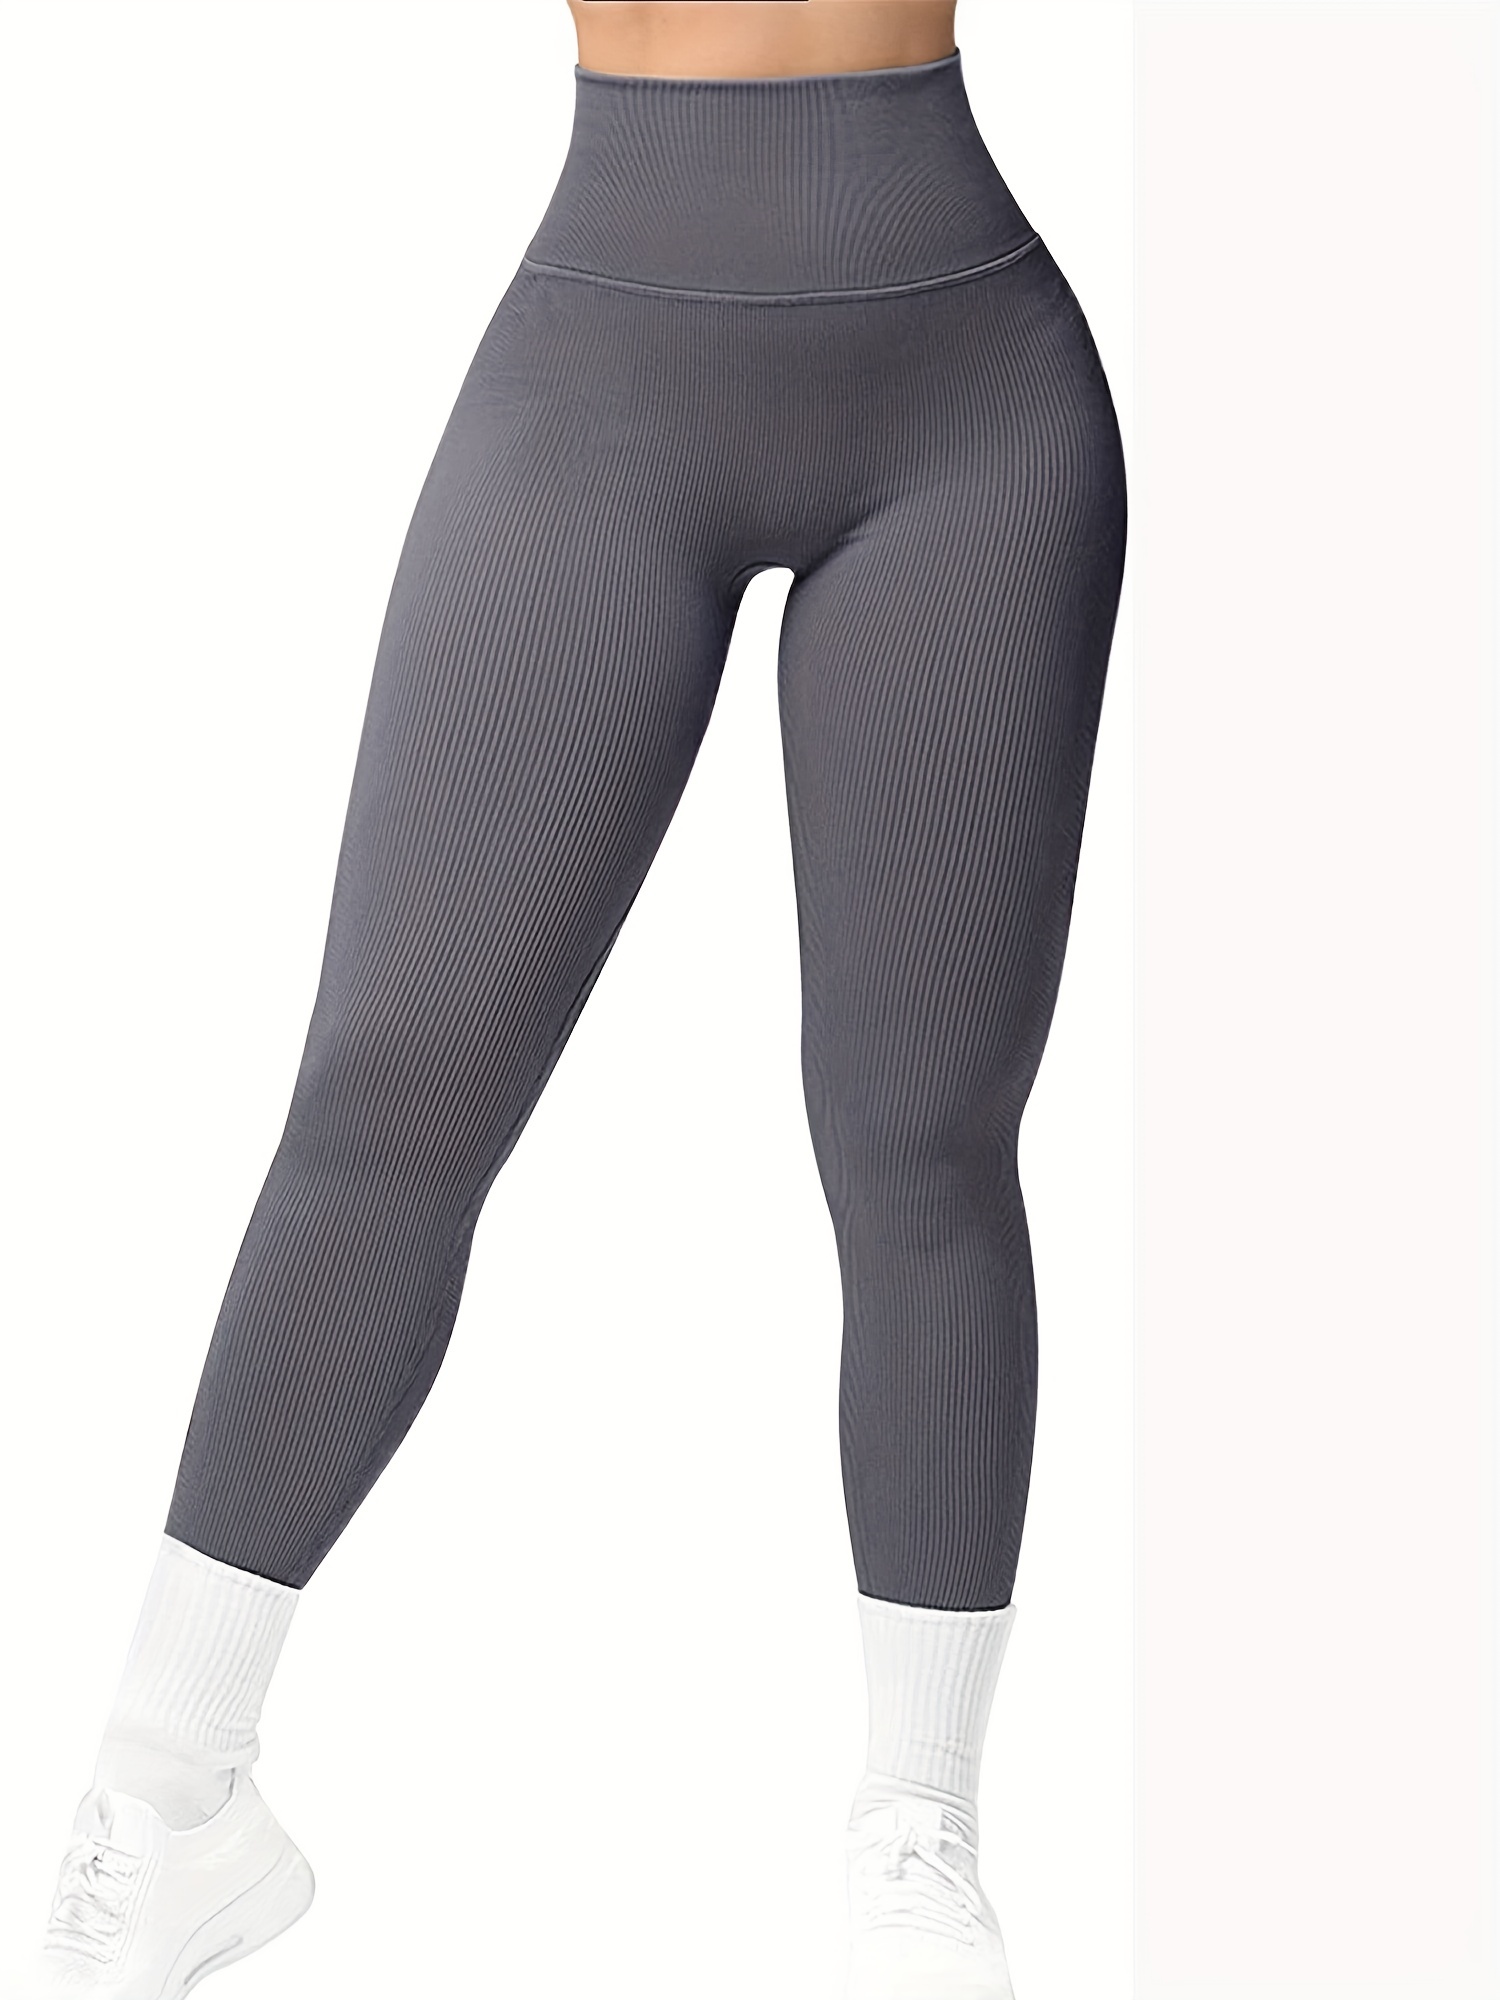 Buy MYO Gym wear Ankle Length Stretchable Workout Tights / Sports Tights /  Sports Fitness Yoga Track Pants for Girls Women Sizes :- S,M,L,XL,XXL  Online In India At Discounted Prices